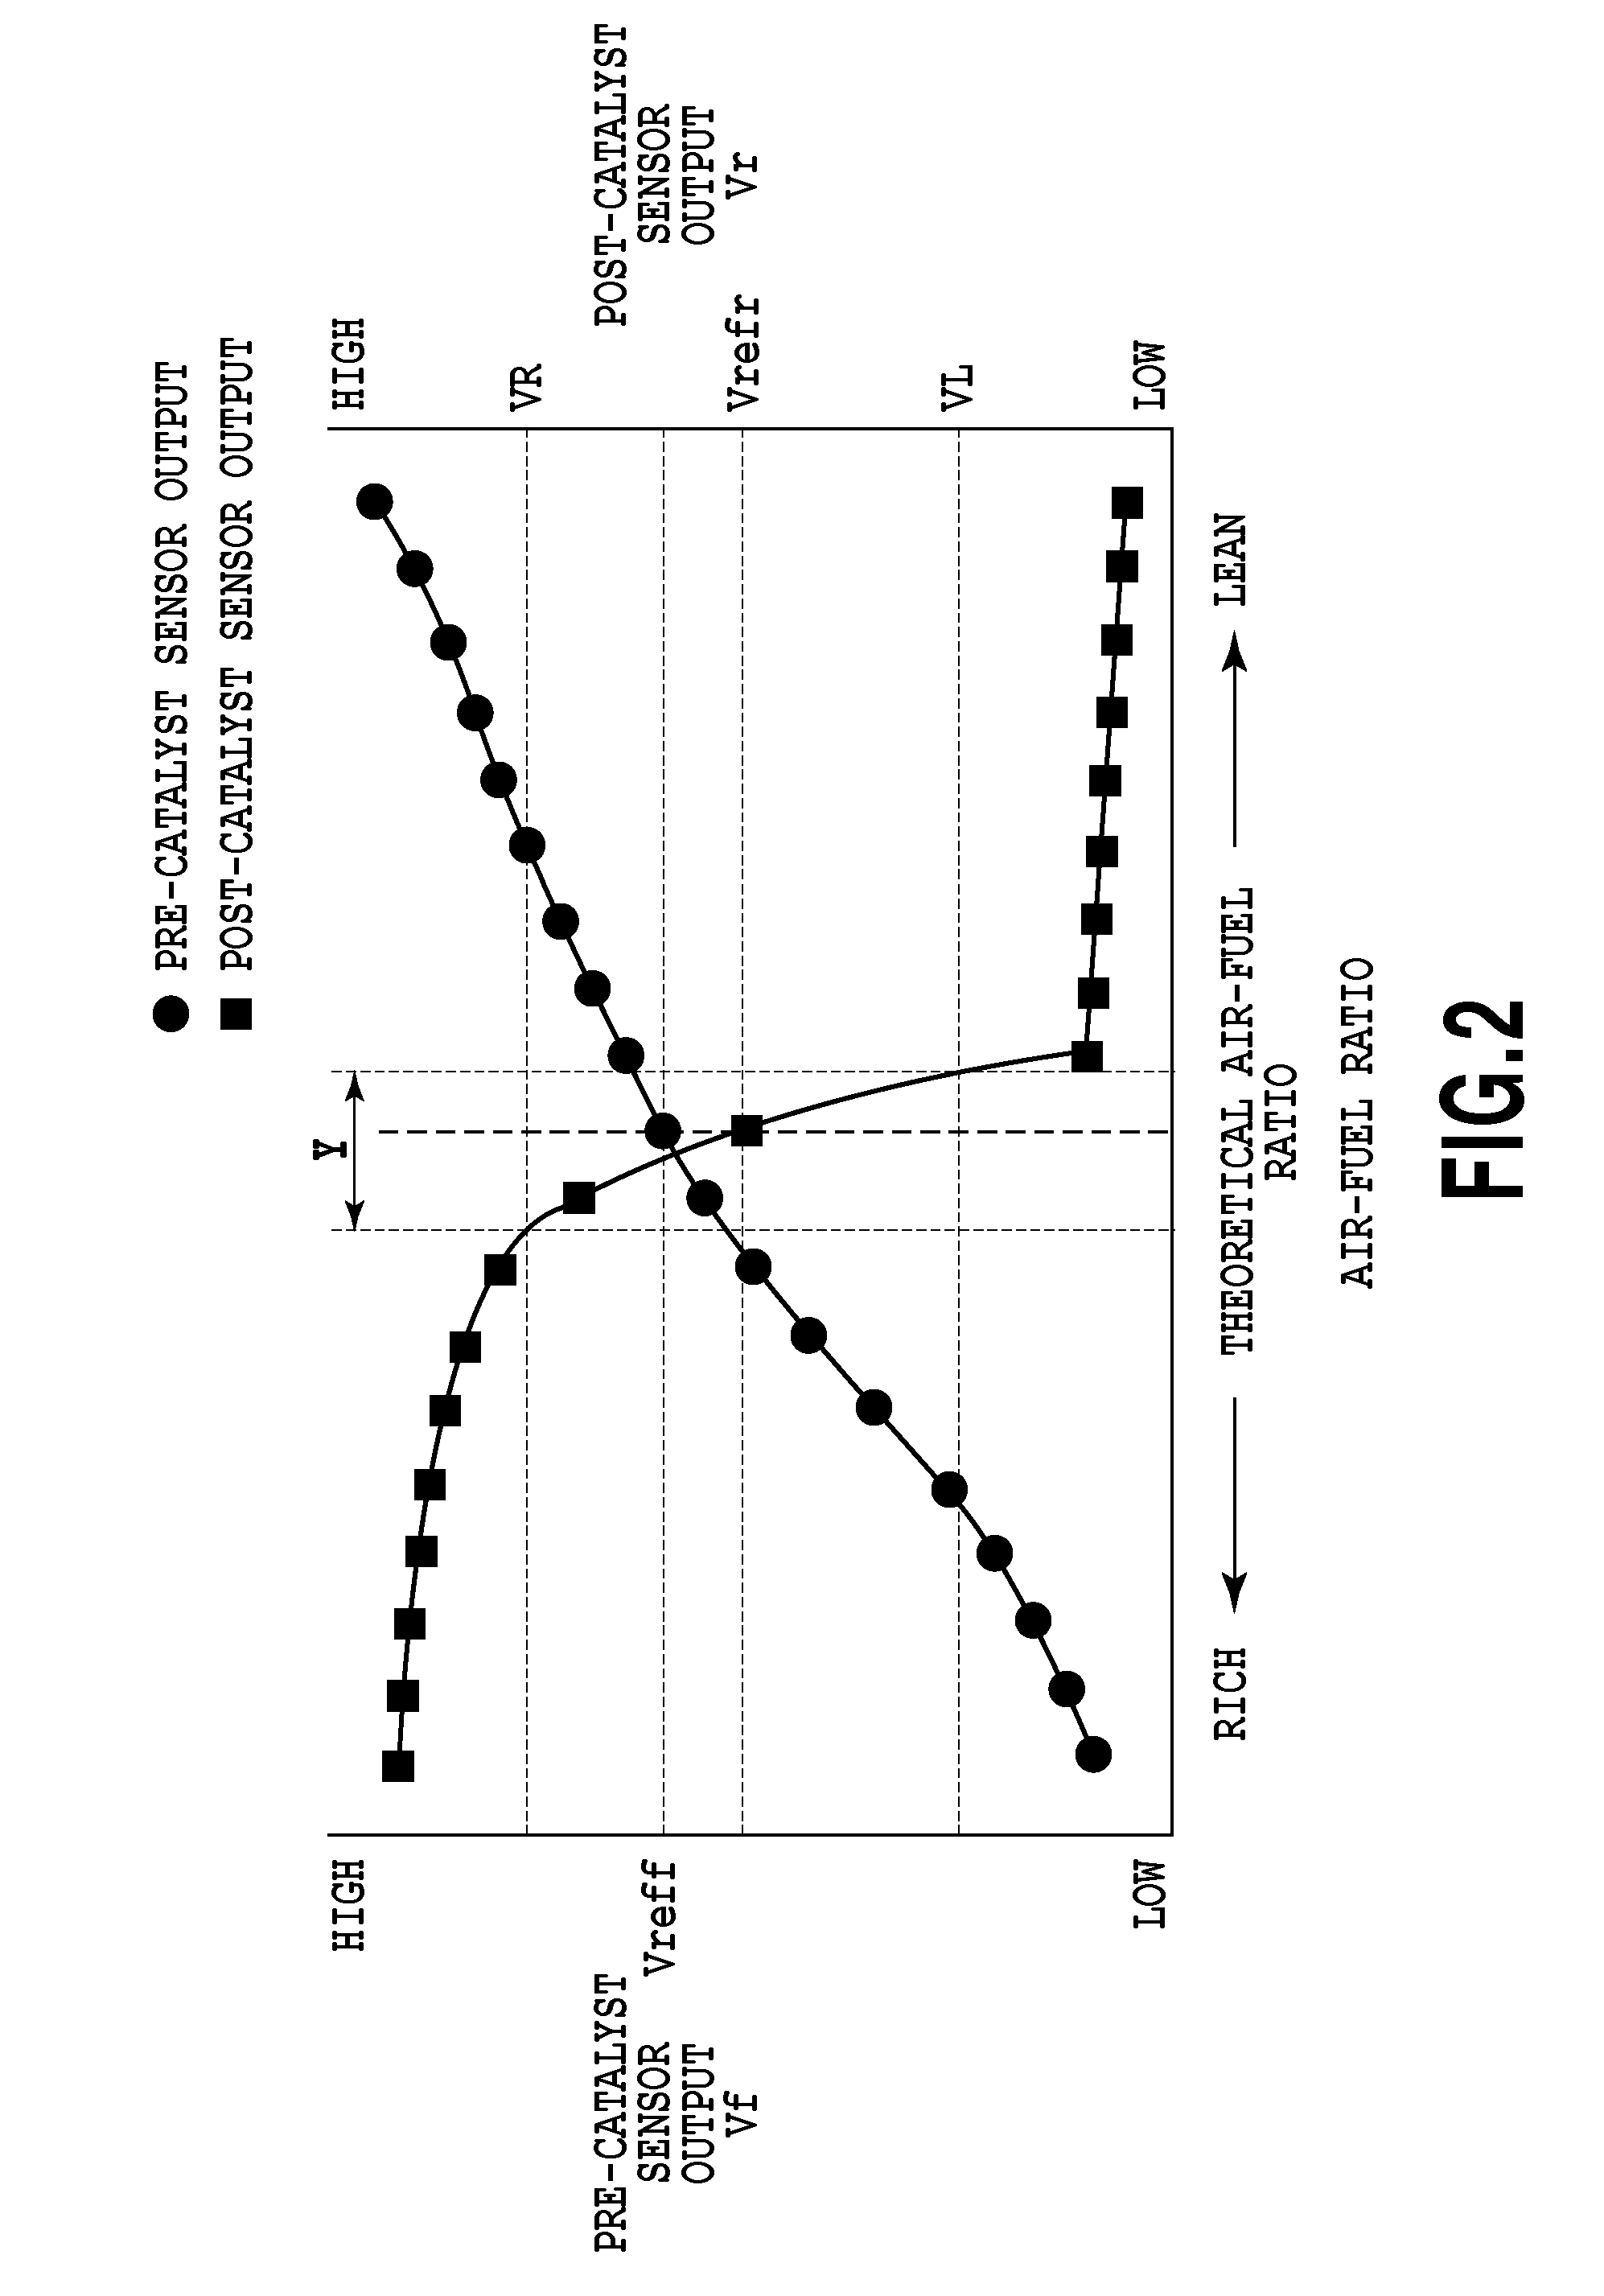 Apparatus for detecting inter-cylinder air-fuel ratio imbalance in multi-cylinder internal combustion engine